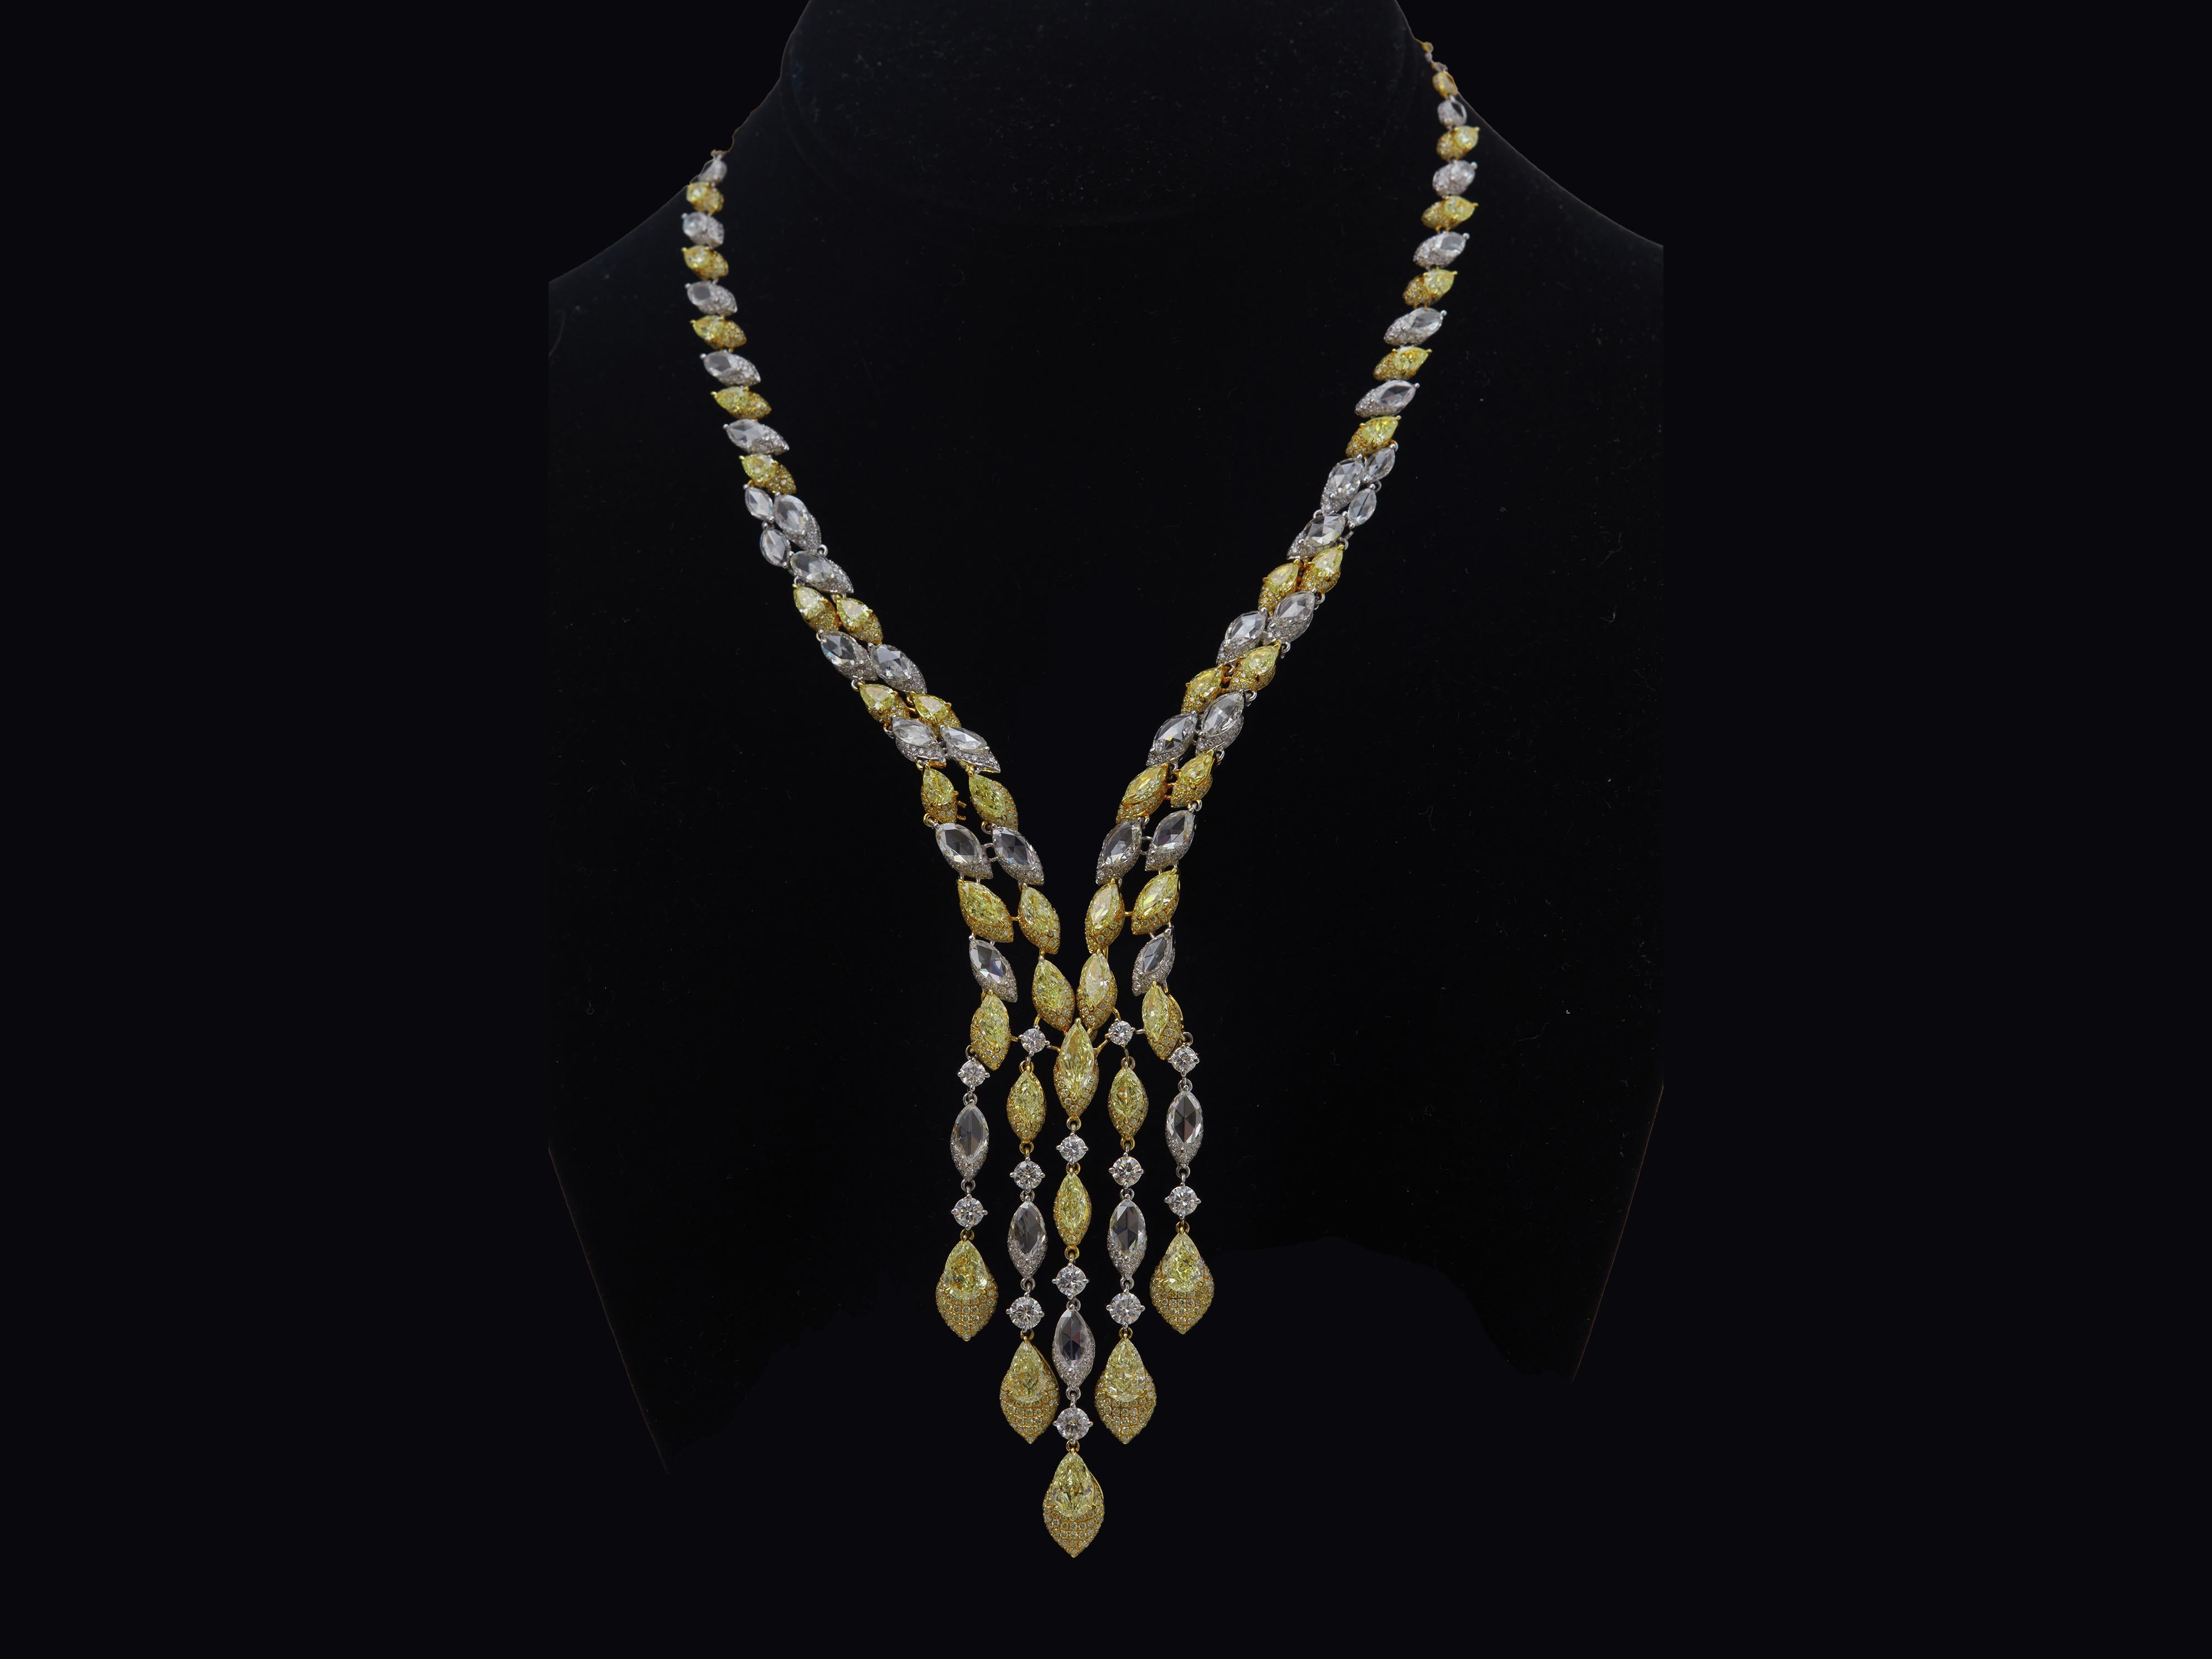 This luxurious design diamond necklace features 5 fancy light yellow diamonds 5.14 carat total weight Pear shape, GIA certified as SI1-VS2 clarity and 2 fancy yellow diamonds 1.06 carat marquis shape, GIA certified as VS1 clarity. suspended with